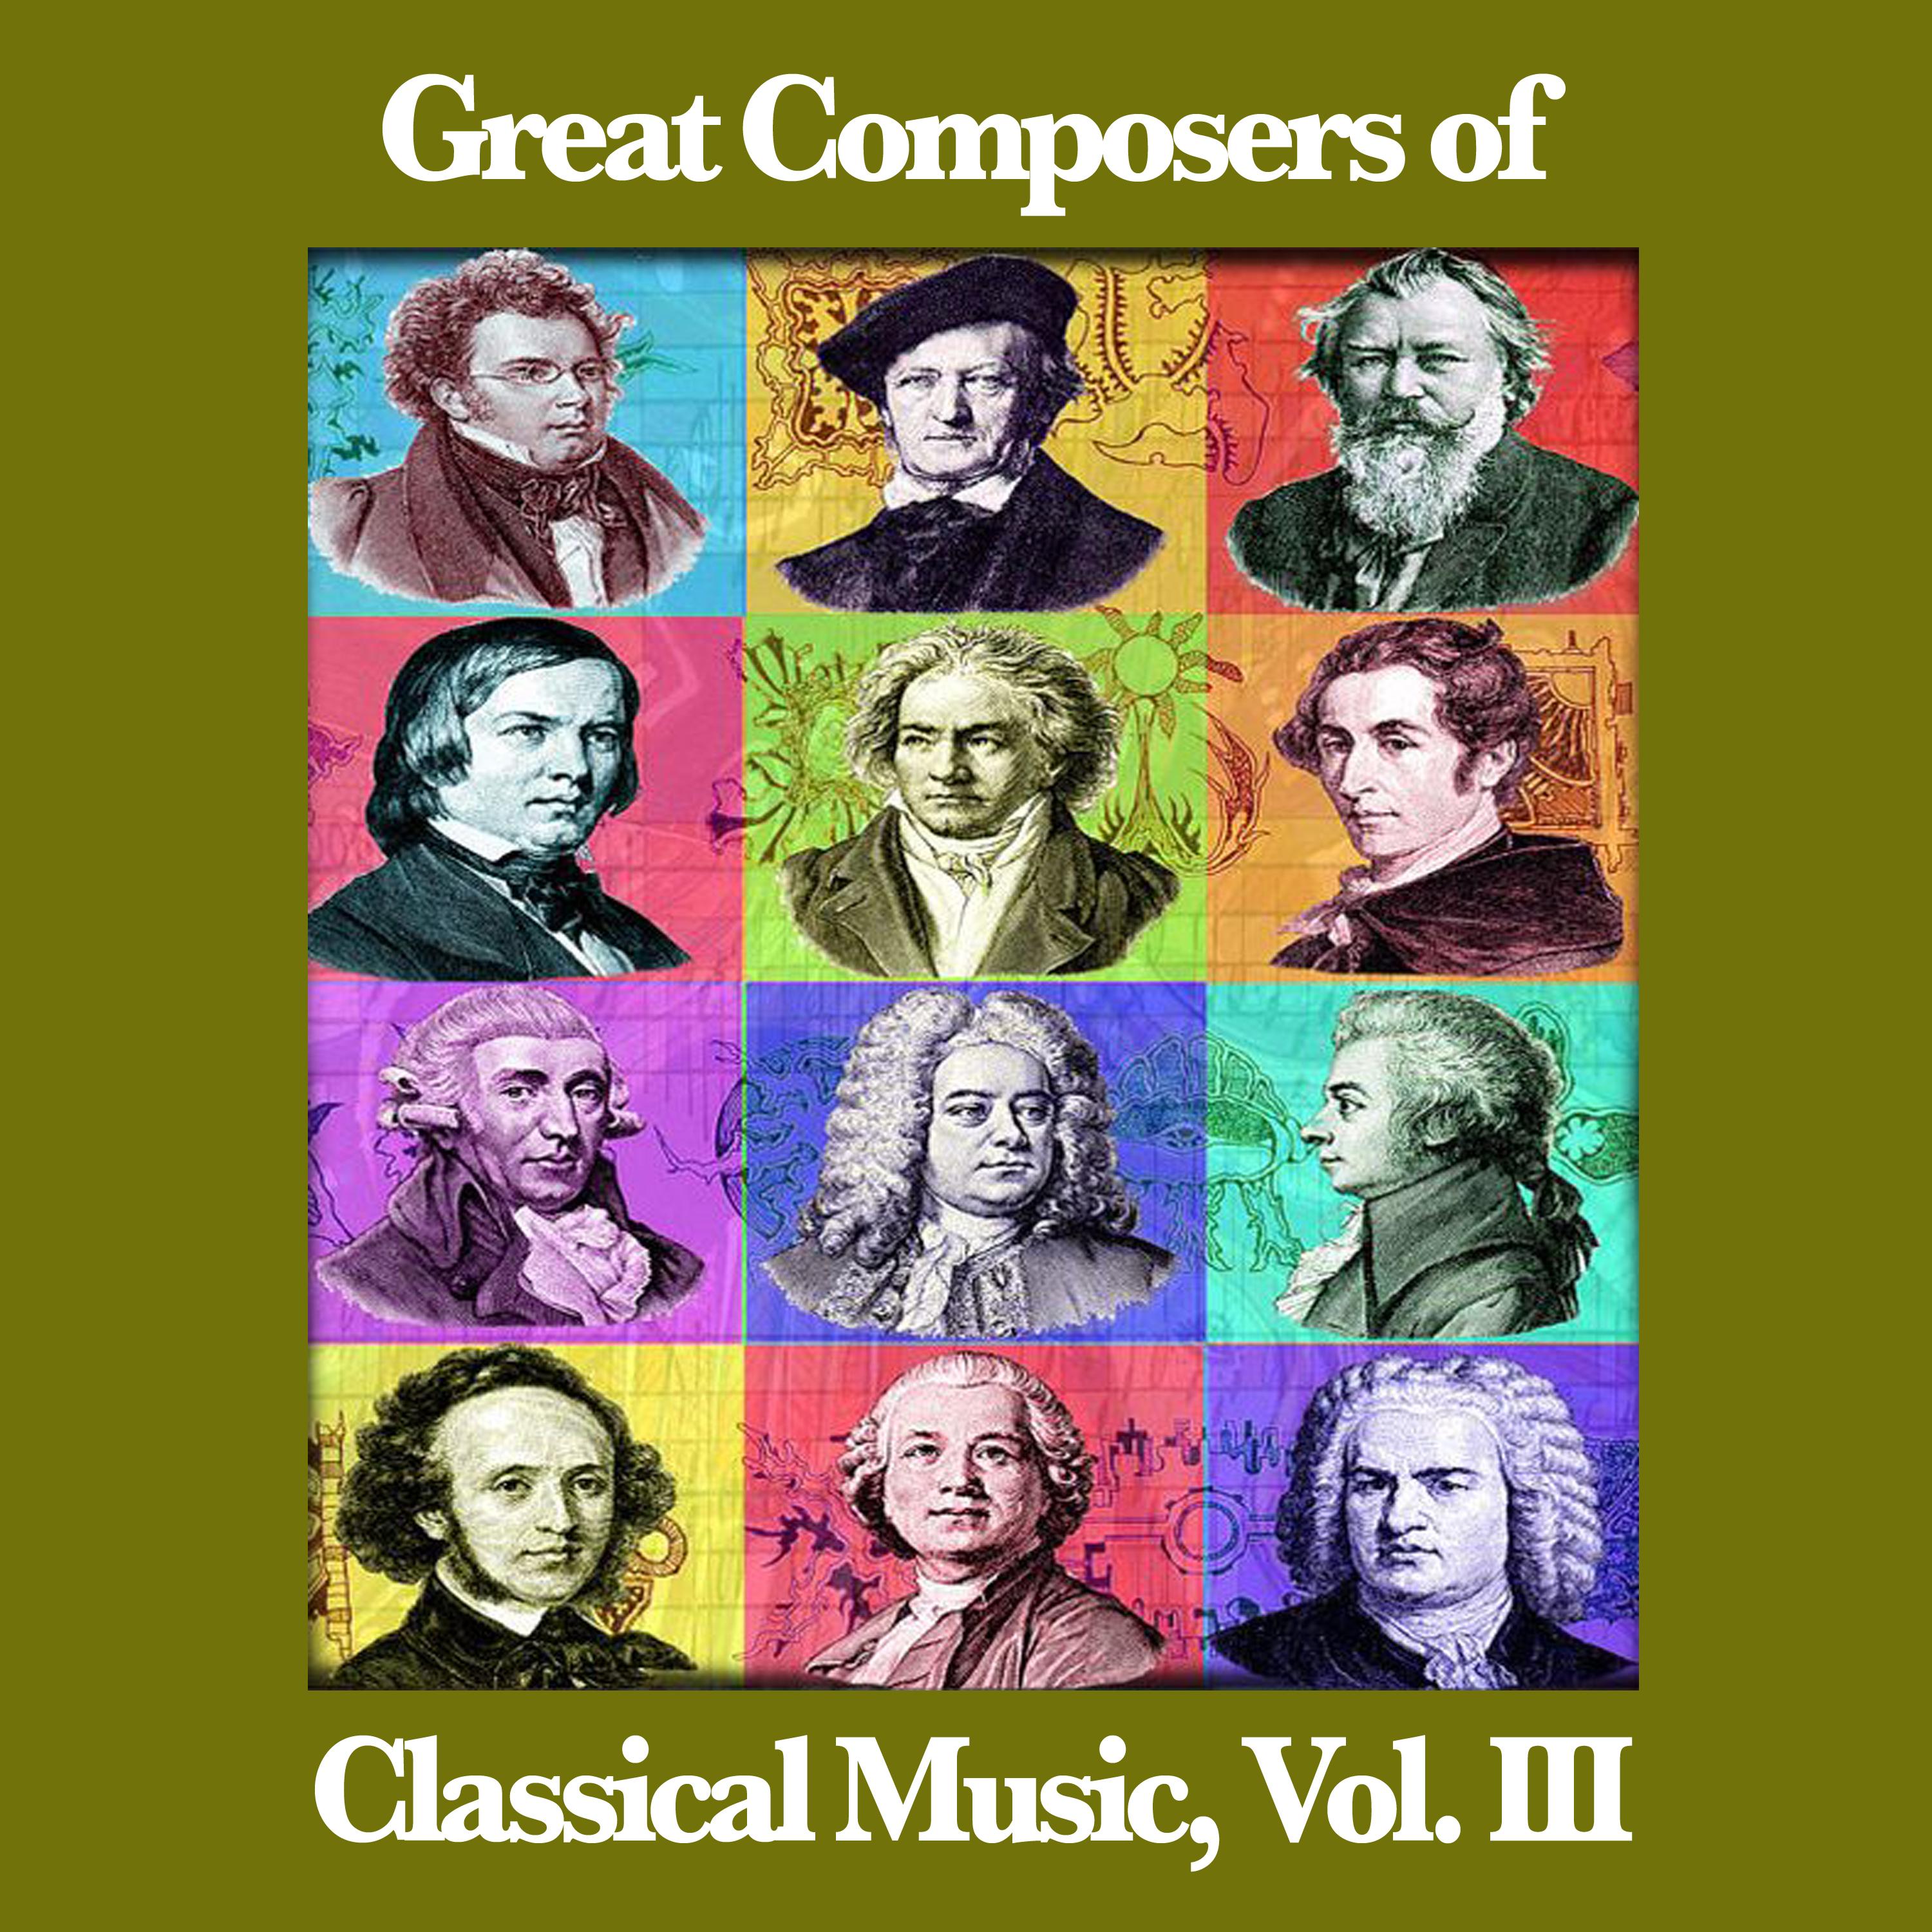 Great Composers of Classical Music, Vol. III